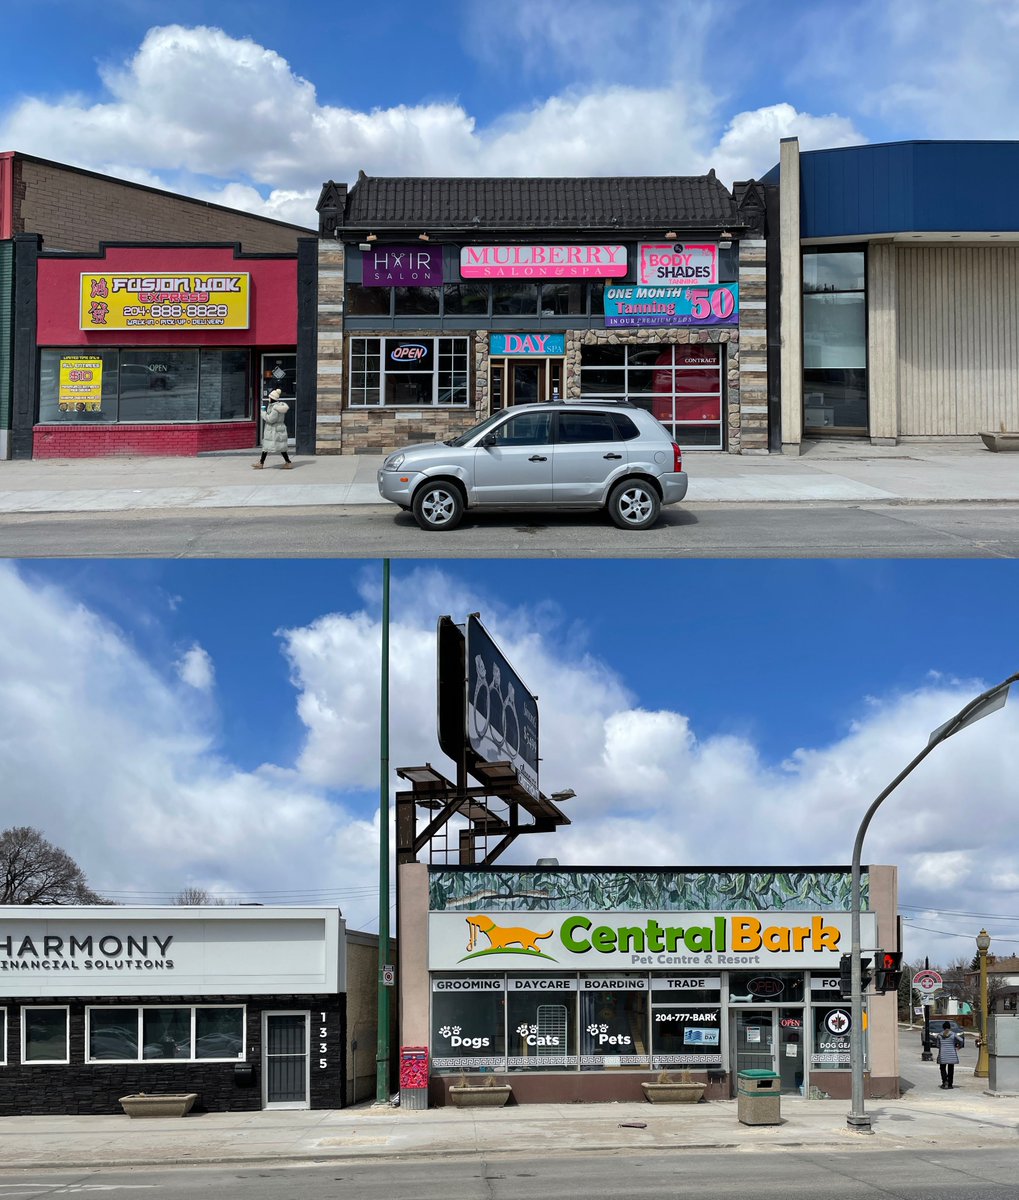 Safeway had an aggressive expansion plan and within two months of the first stores opening, another 9 opened. Six are still standing. 4/14893 Portage1331 Portage1411 Main (the largest original store)129 Marion581 Sargent227 Henderson